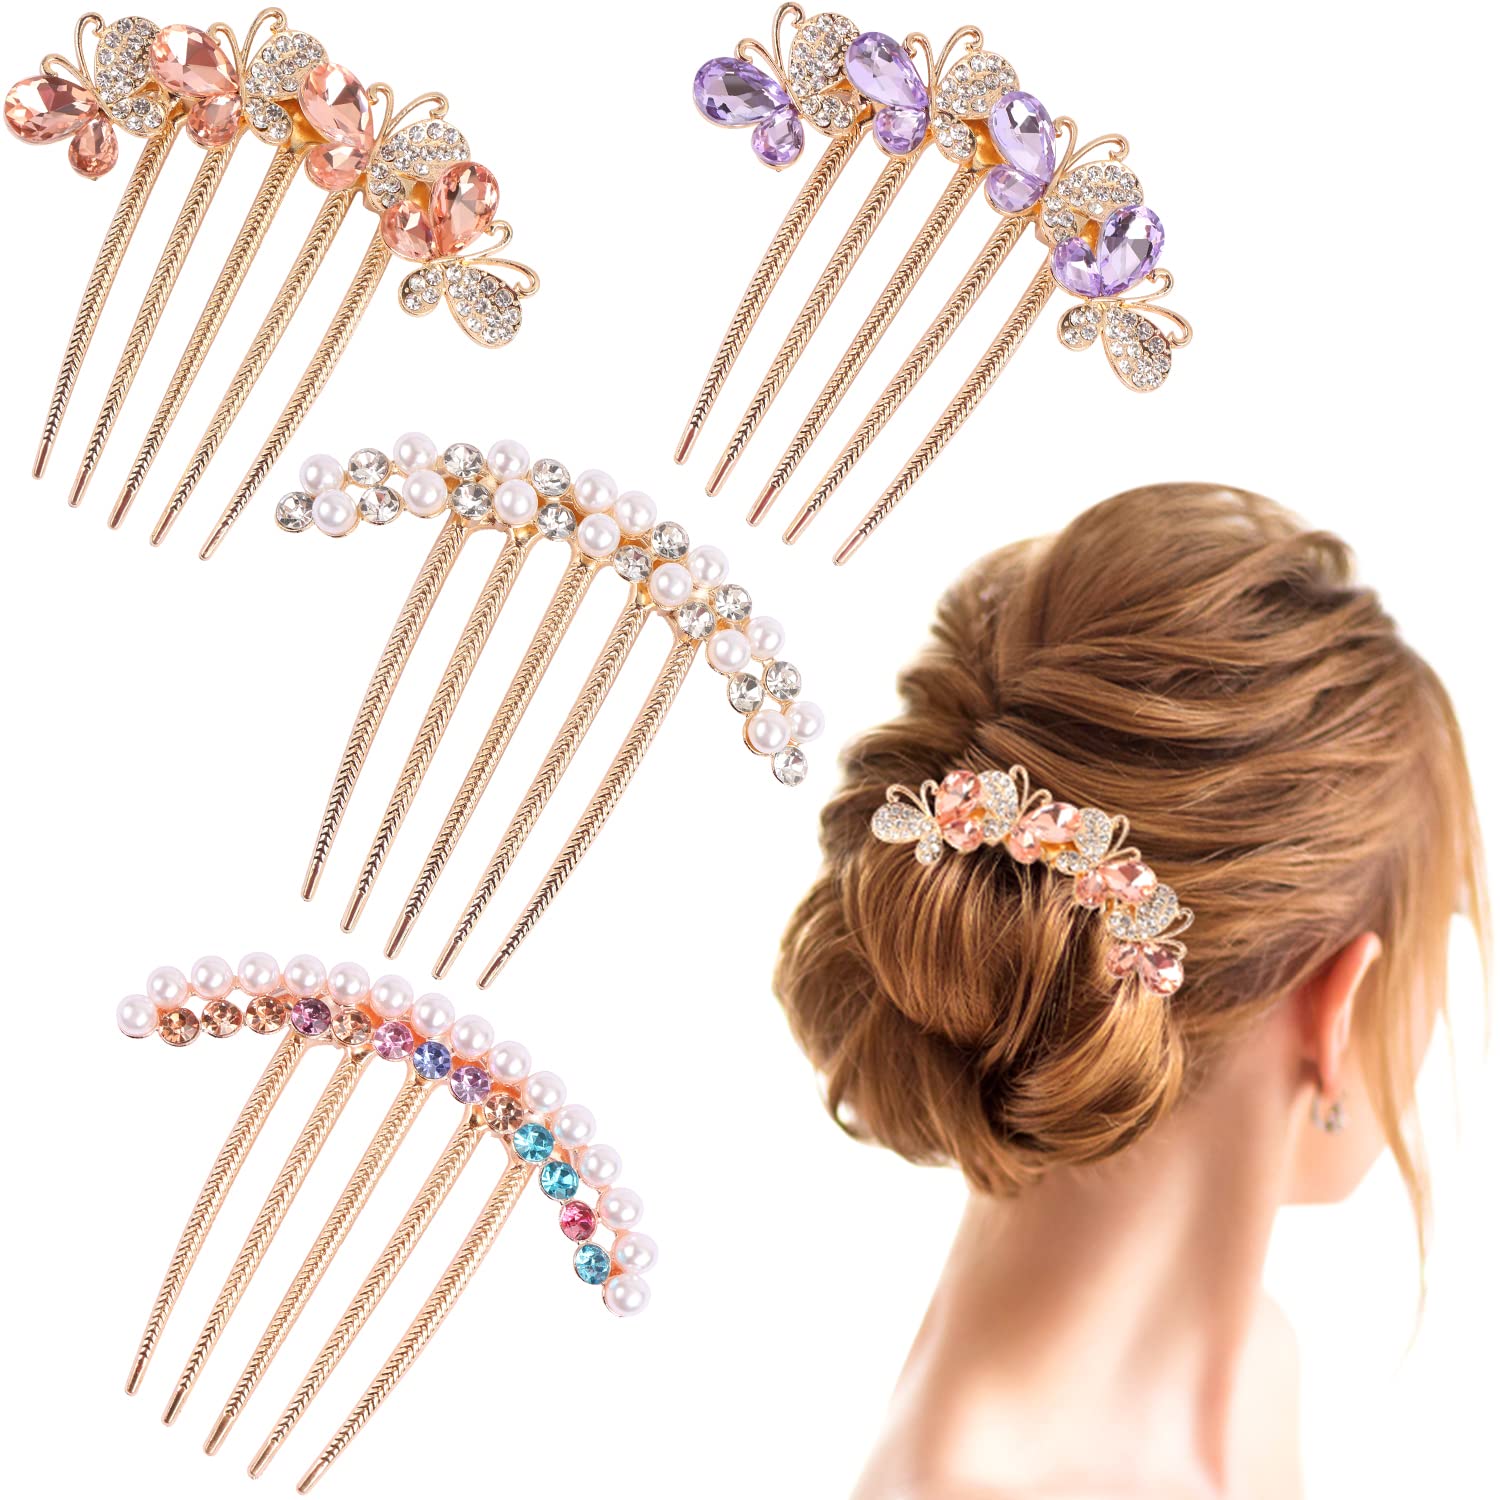 4 Pcs Pearl Rhinestones Hair Side Combs for Women Accessories ...